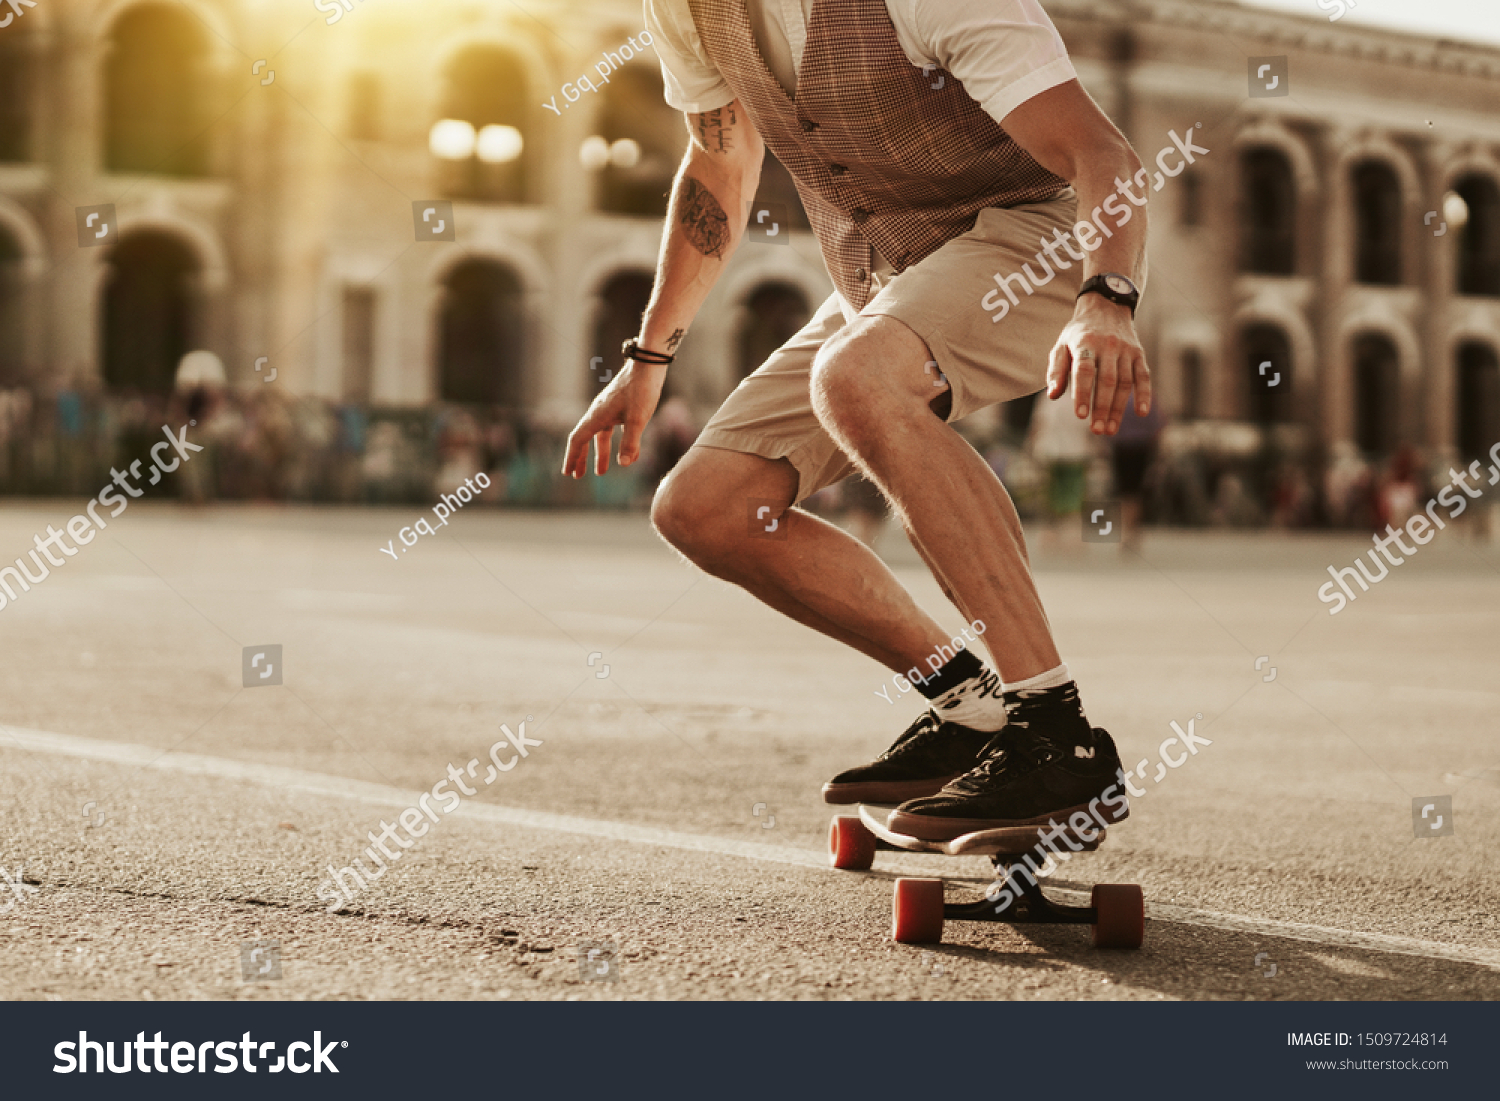 Urban man lifestyle. Stylish man ride on skateboard in white shirt on city street. Portrait of handsome bearded hipster male near road on buildings background. #1509724814